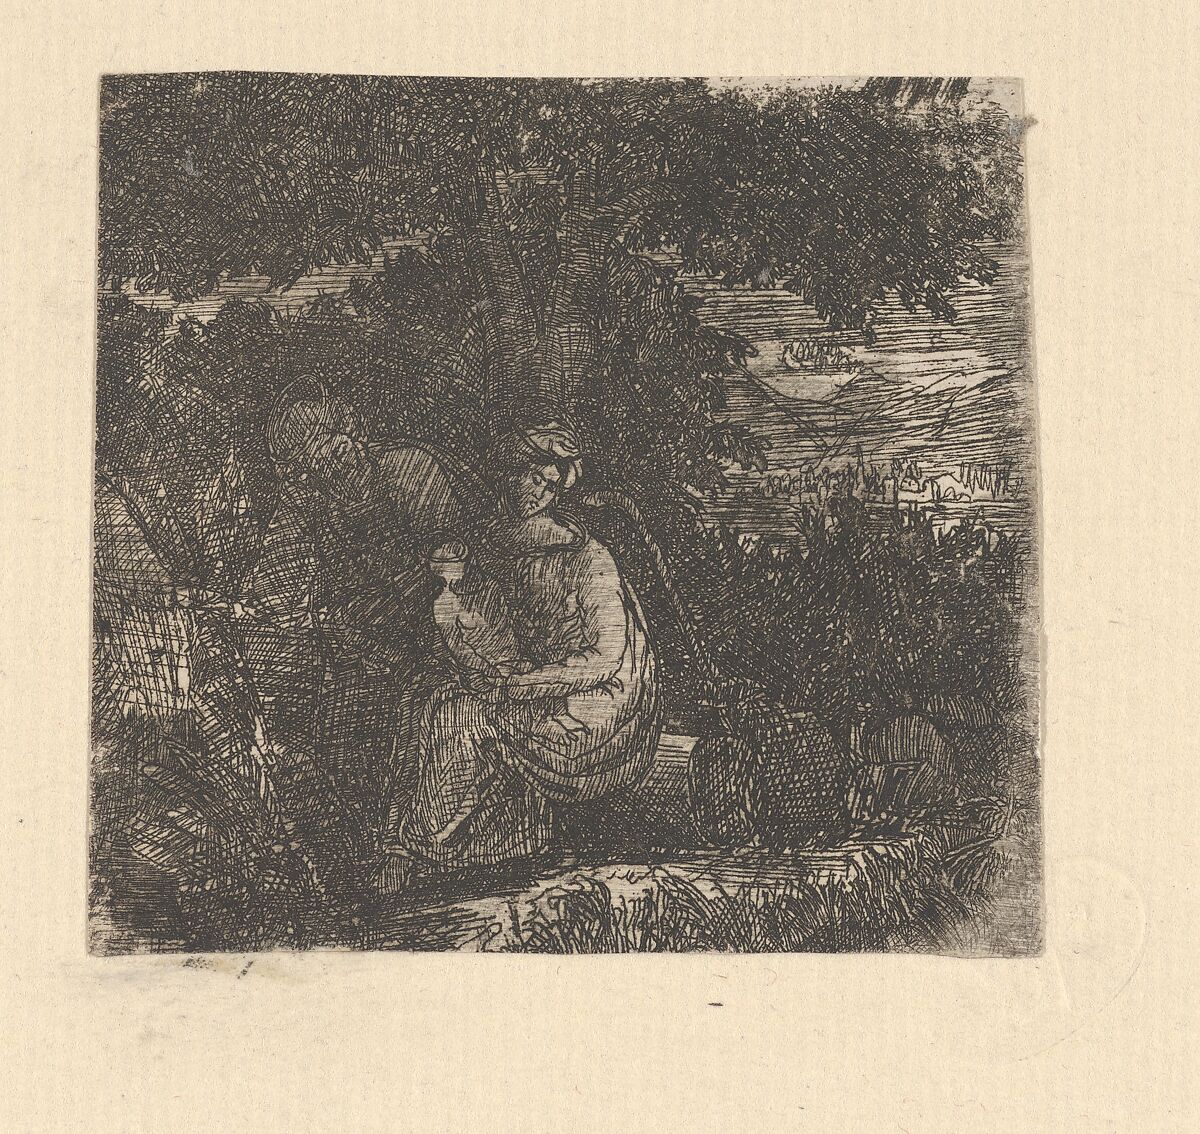 La Sainte Famille (The Holy Family), Rodolphe Bresdin (French, Montrelais 1822–1885 Sèvres), Etching; first state of two (Van Gelder) 